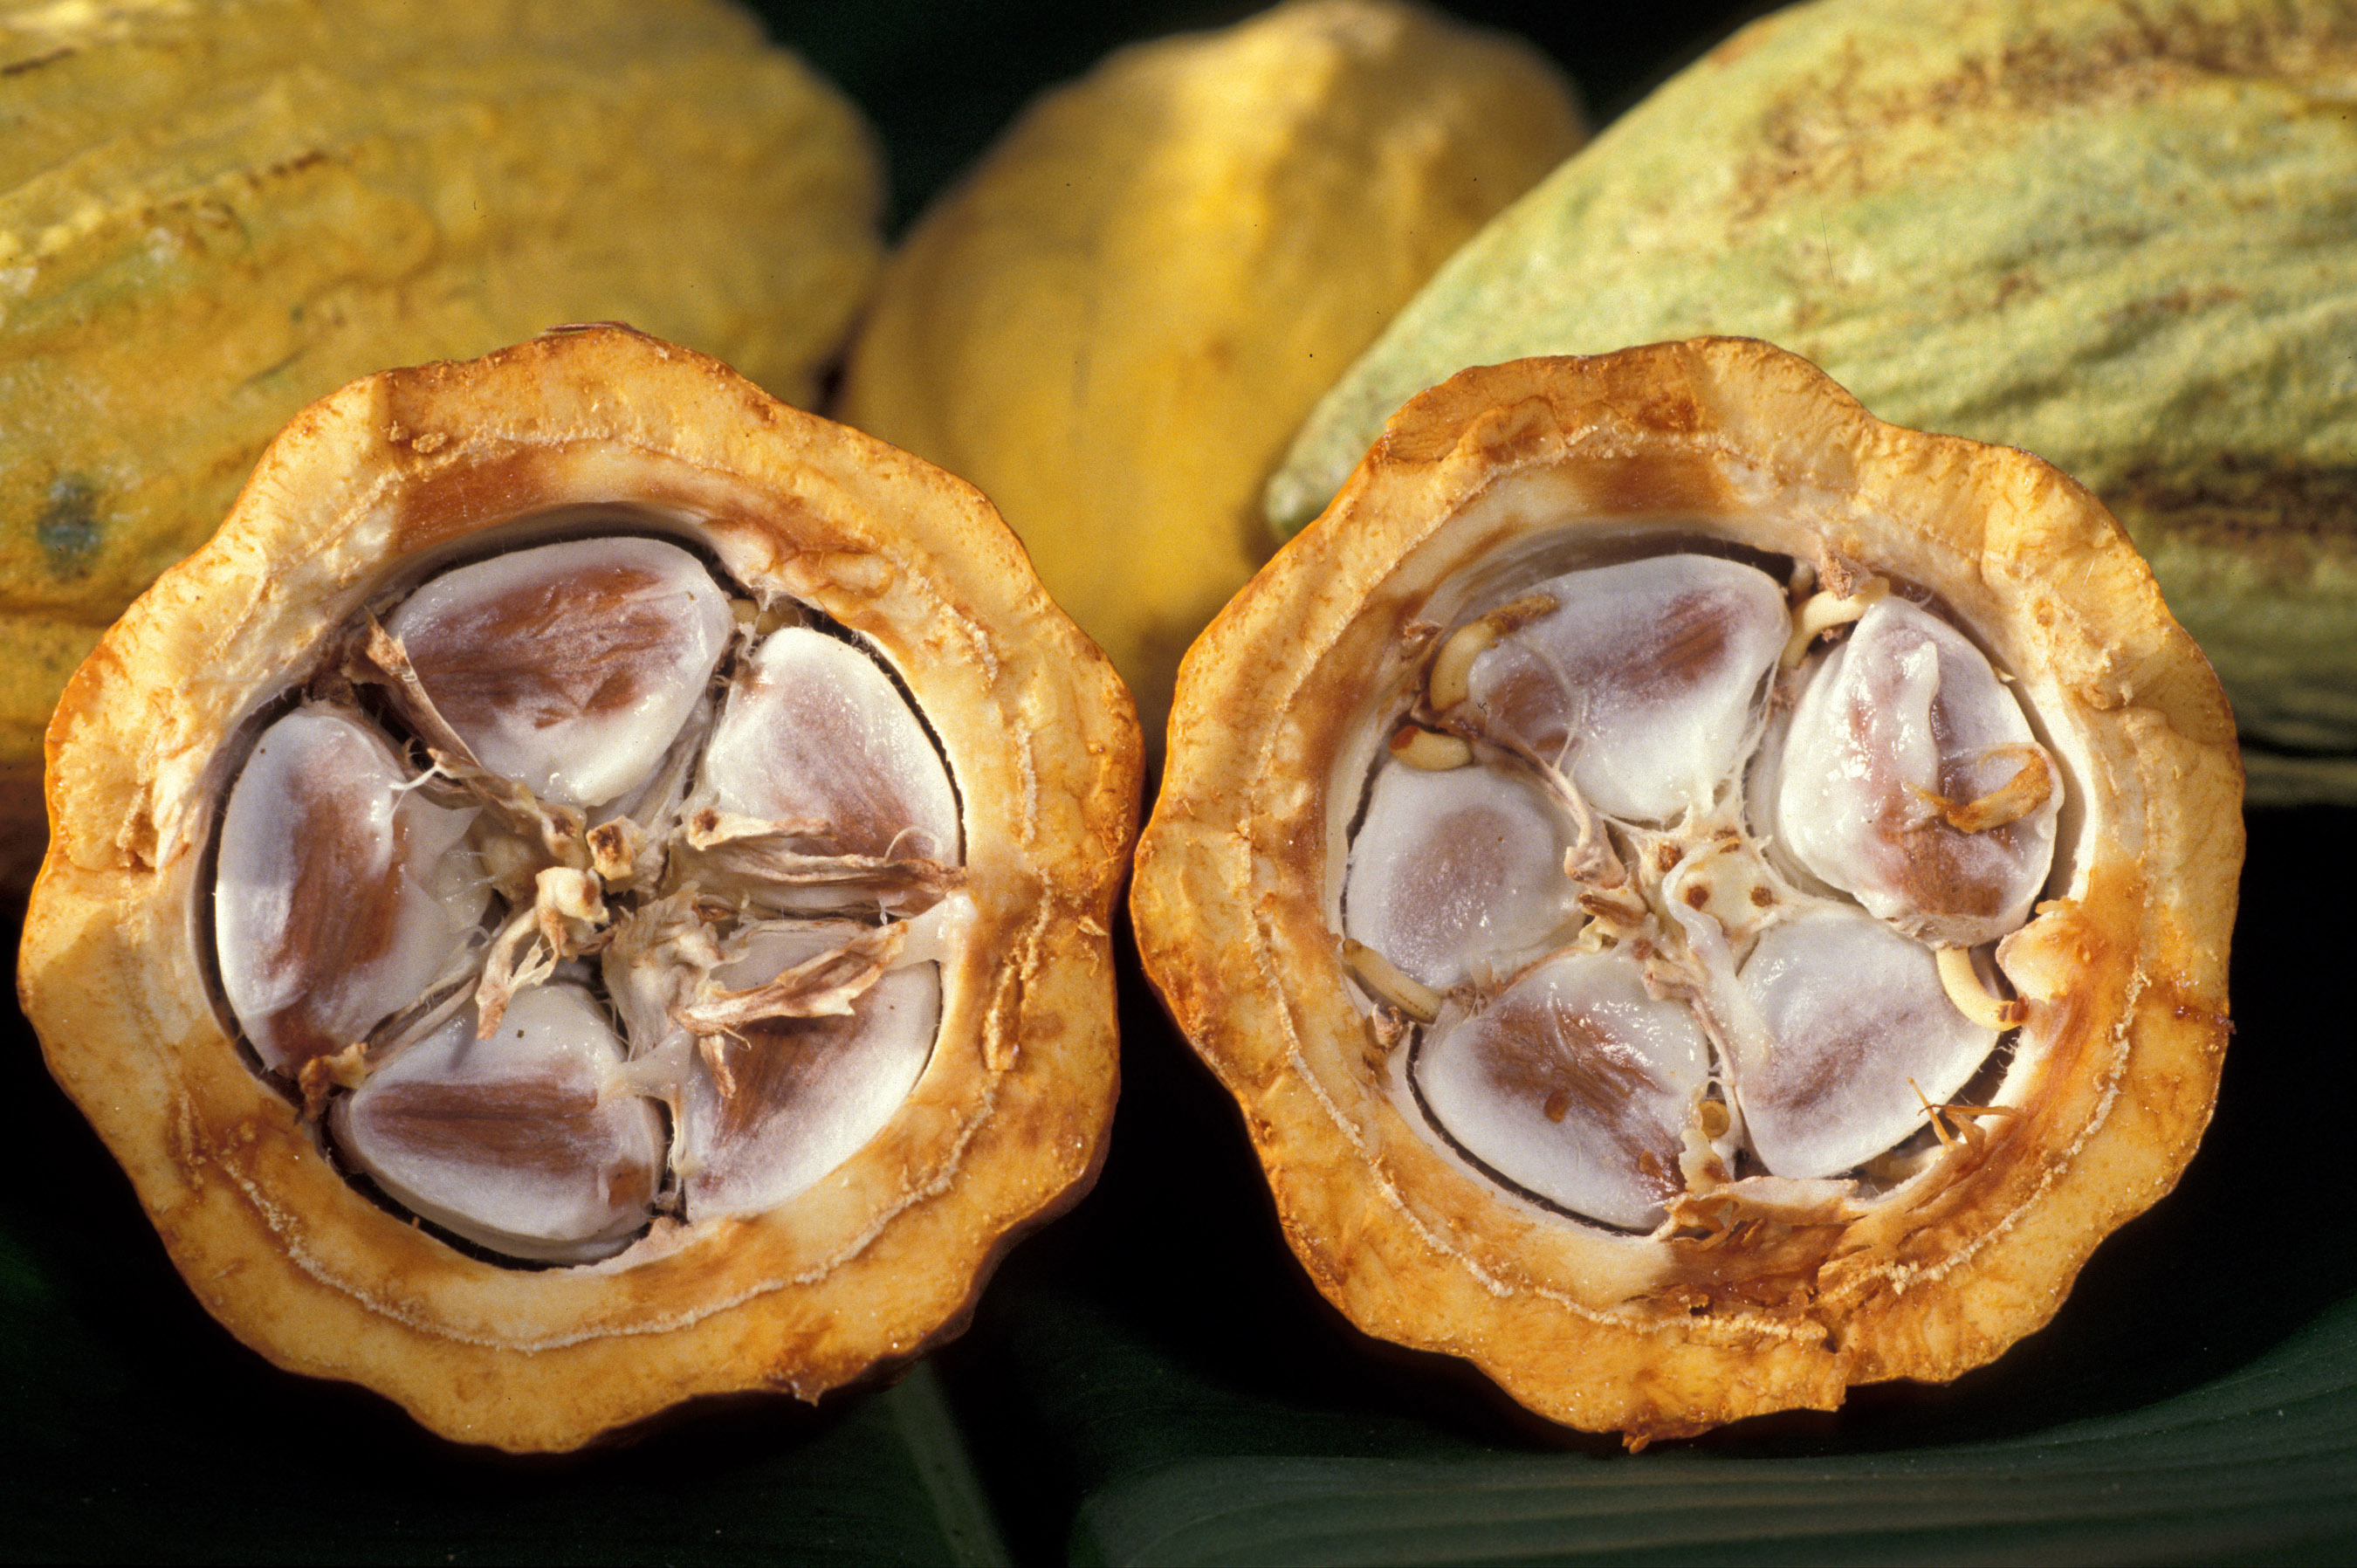  Ivory Coast: Certified cocoa stocks fall by 43% 